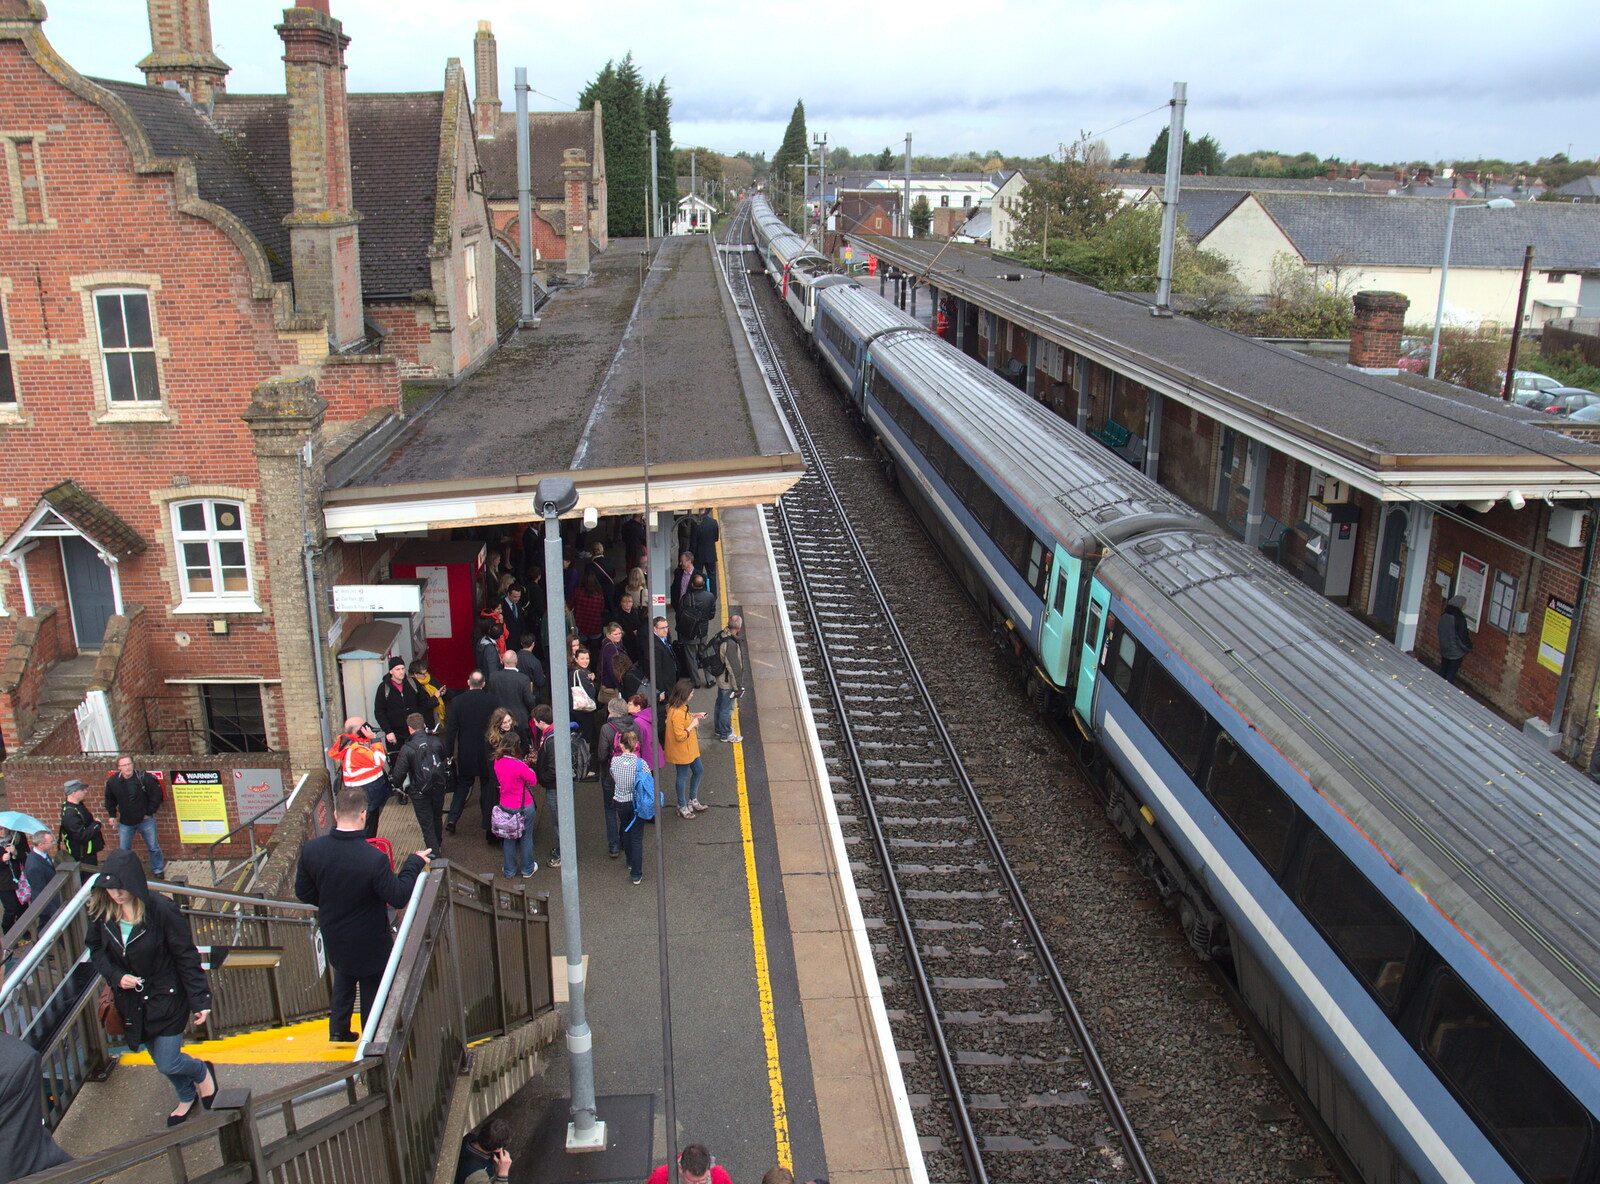 A busy Stowmarket Station from (Very) Long Train (Not) Running, Stowmarket, Suffolk - 21st October 2014